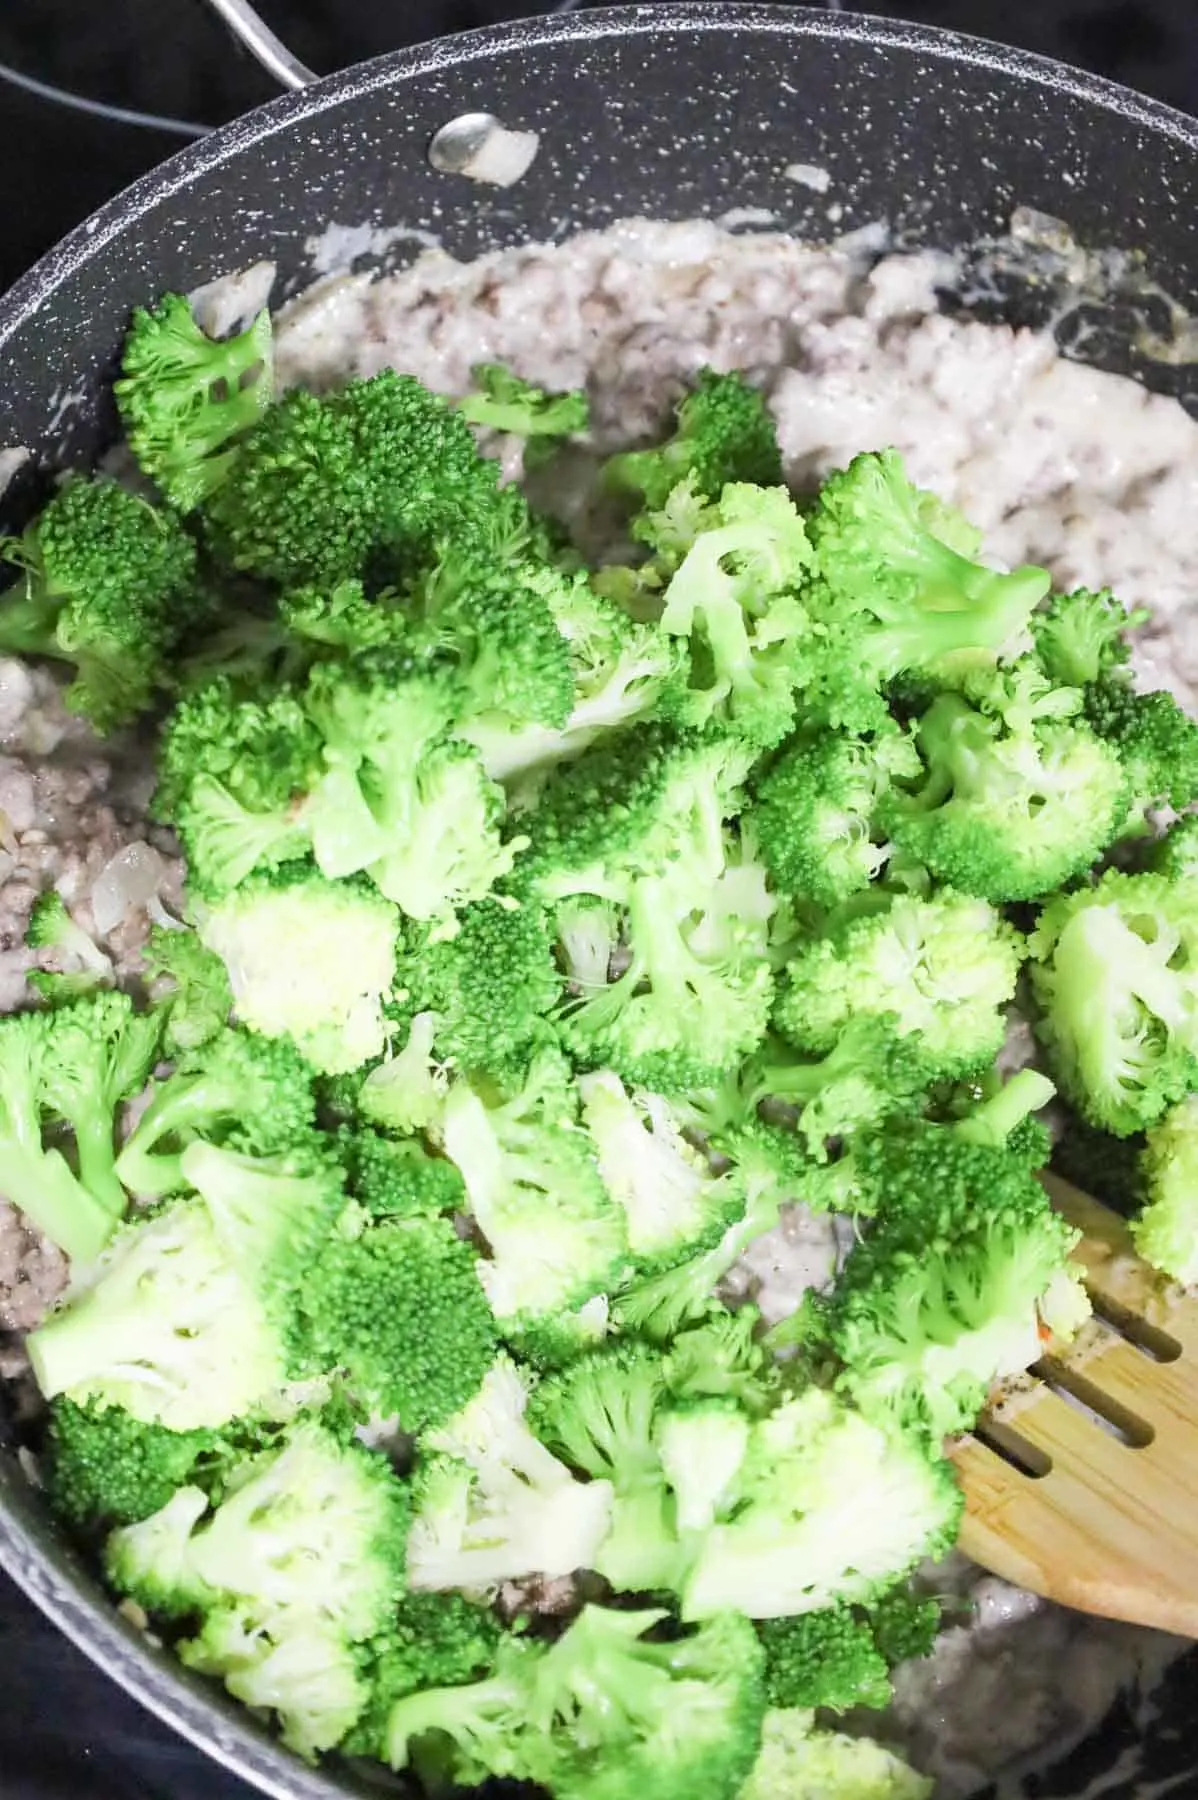 blanched broccoli florets added to skillet with ground beef and alfredo sauce mixture